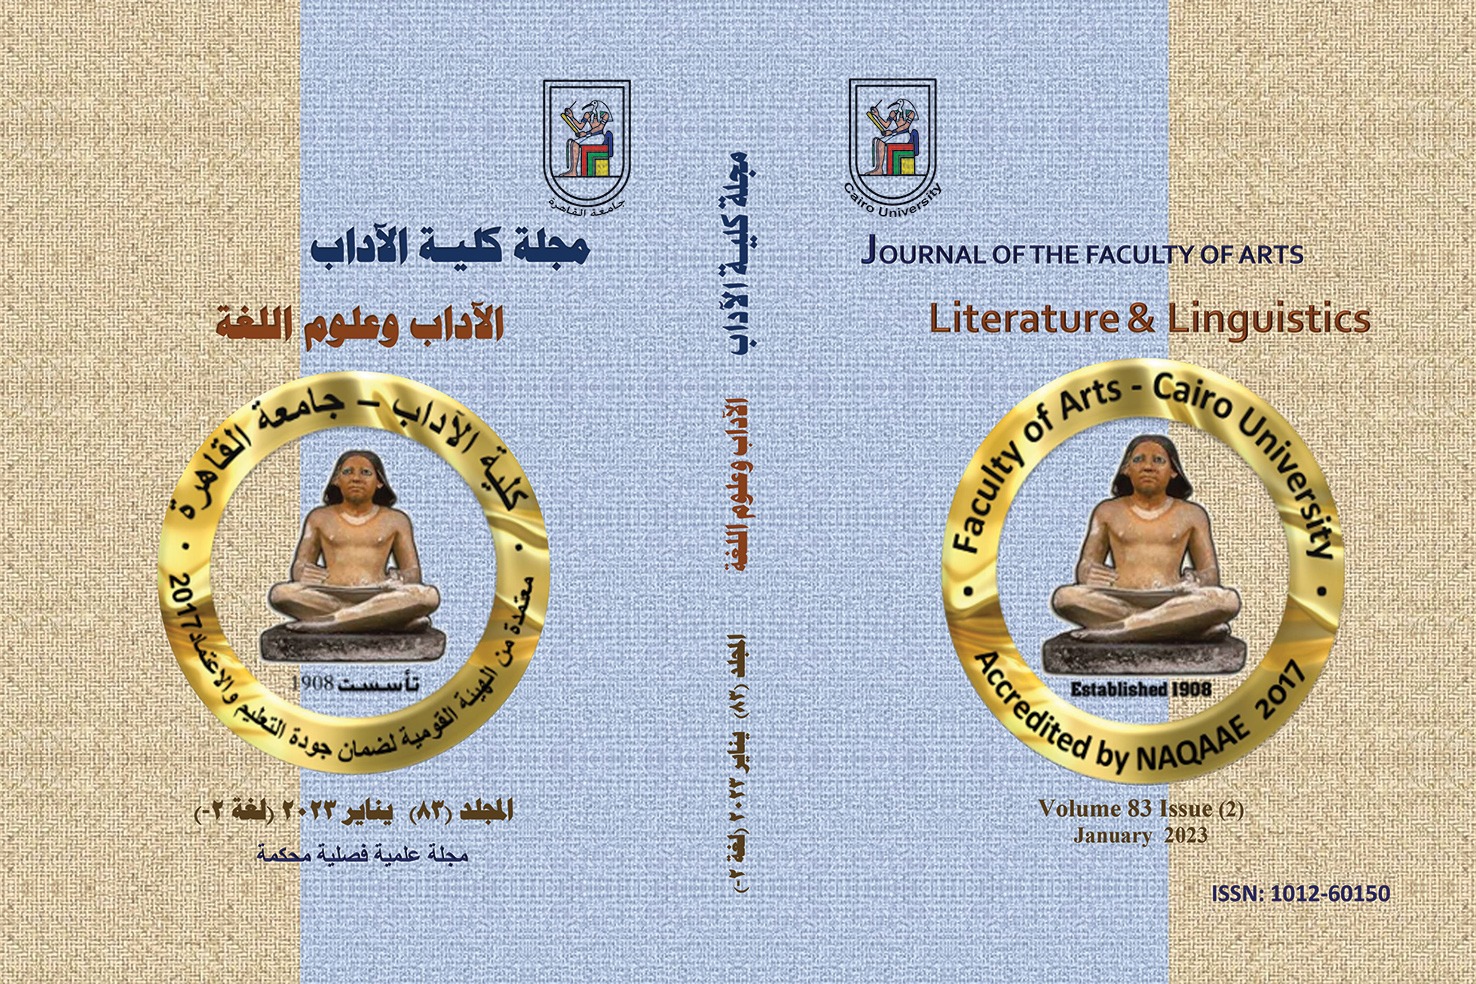 Journal of the Faculty of Arts